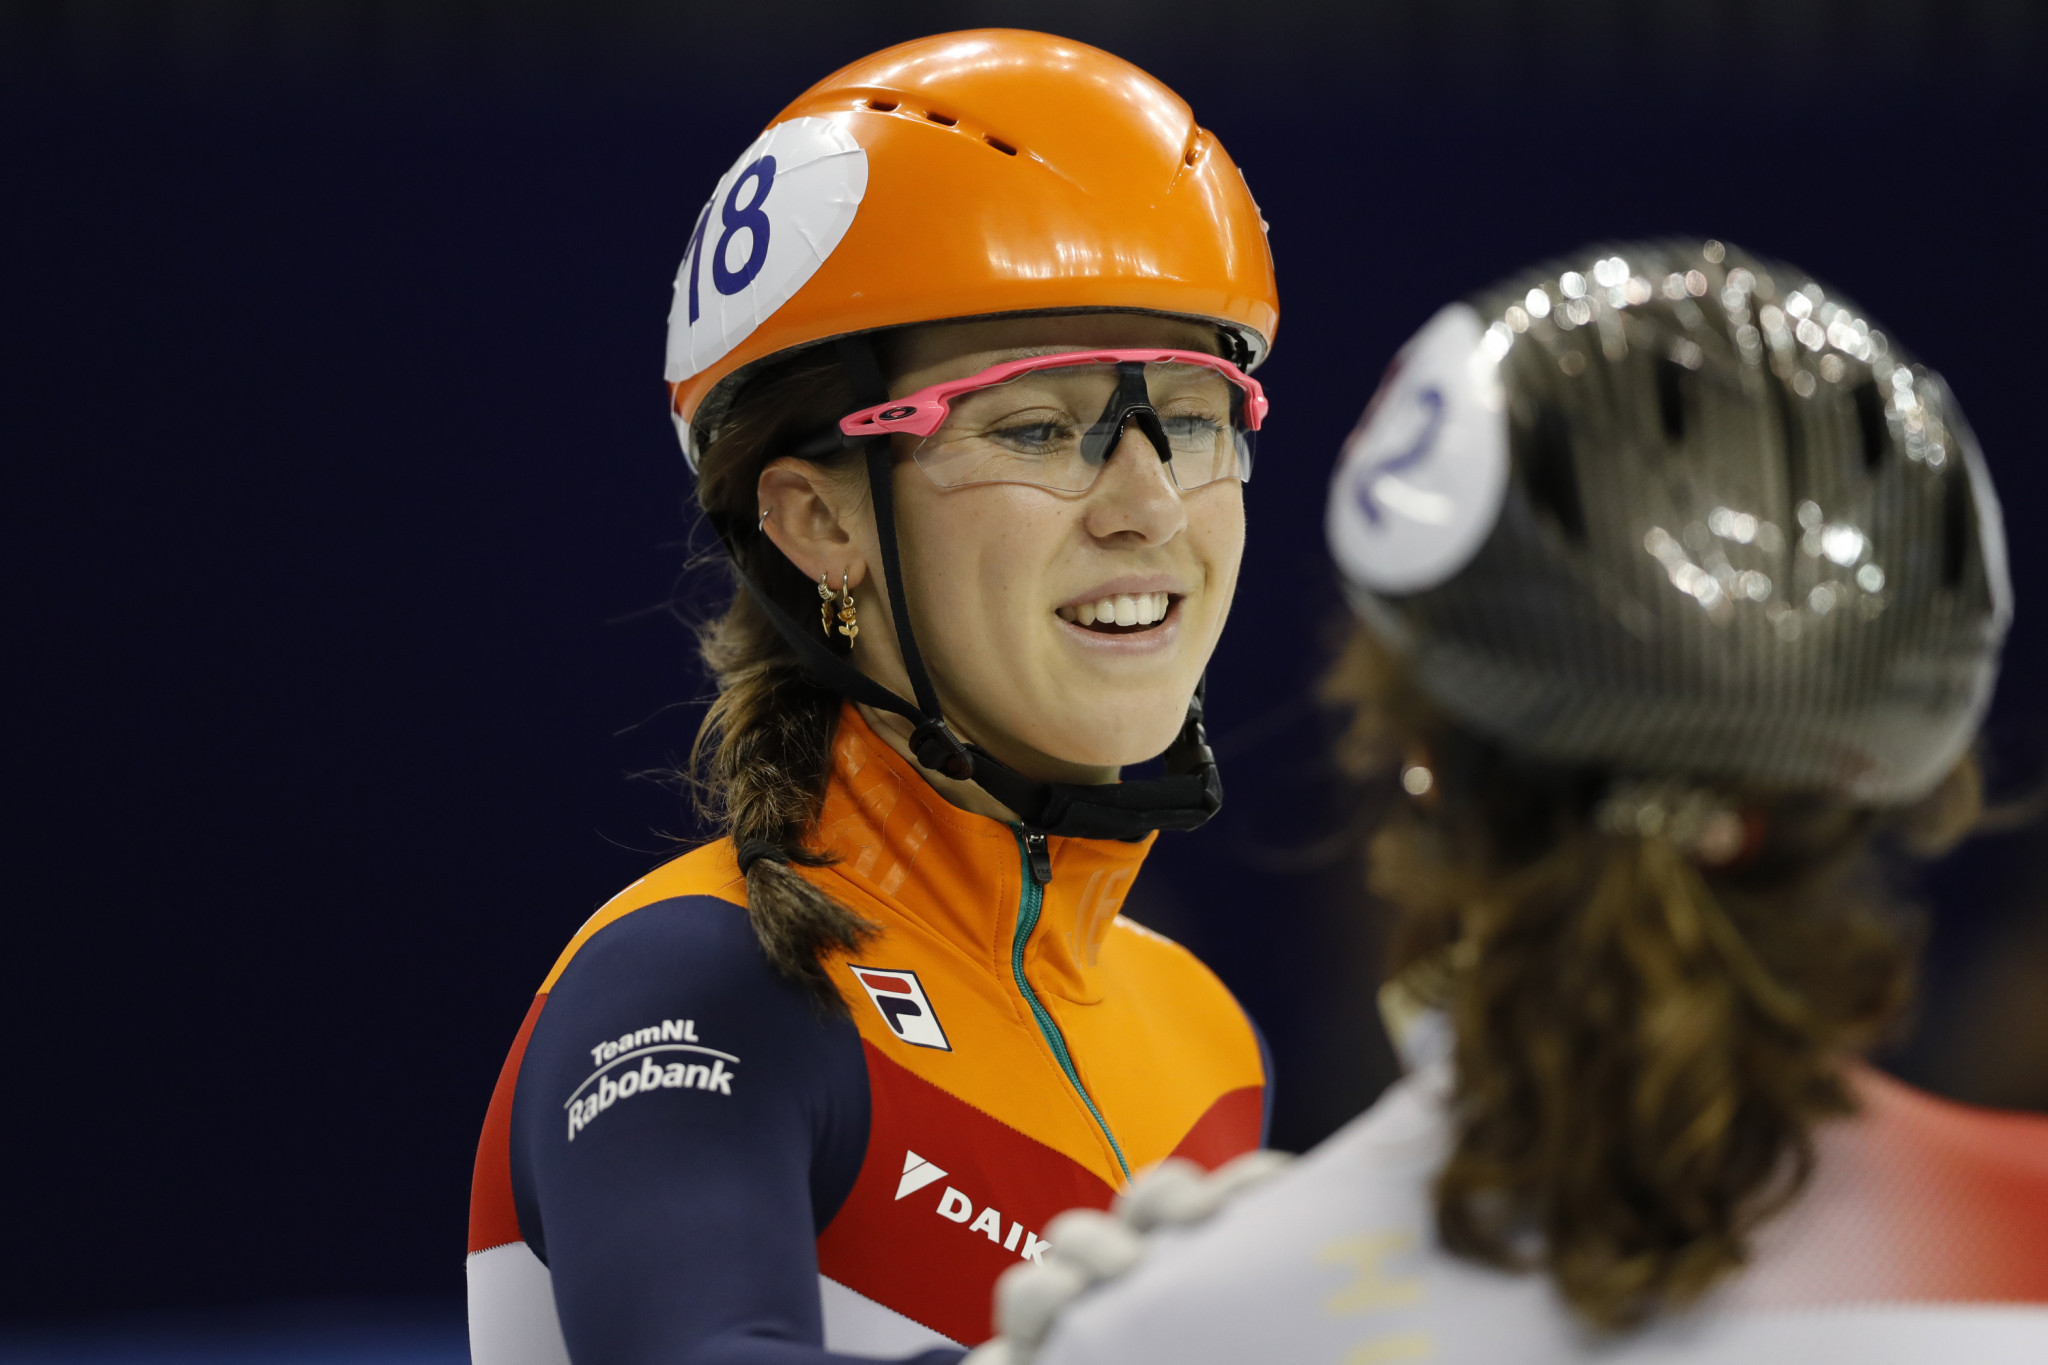 Suzanne Schulting of The Netherlands moved closer to the overall ISU Short Track World Cup 1000m title in Dresden tonight ©Getty Images